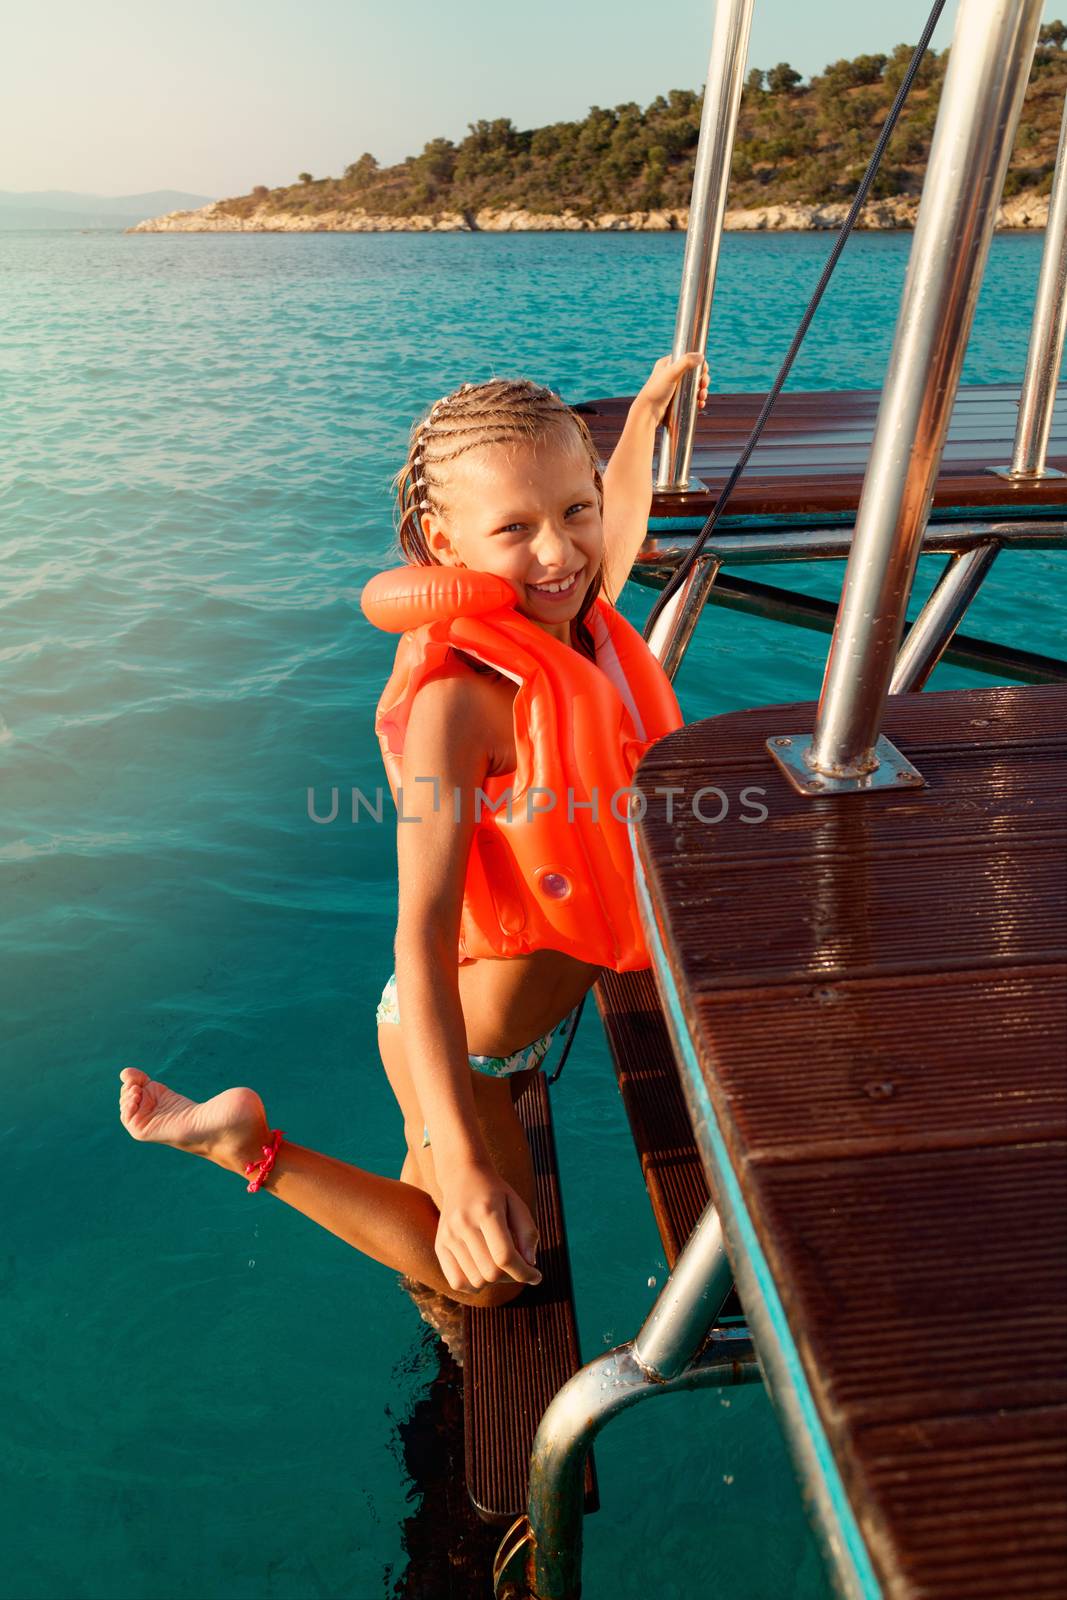 Little Girl On A Cruise by MilanMarkovic78